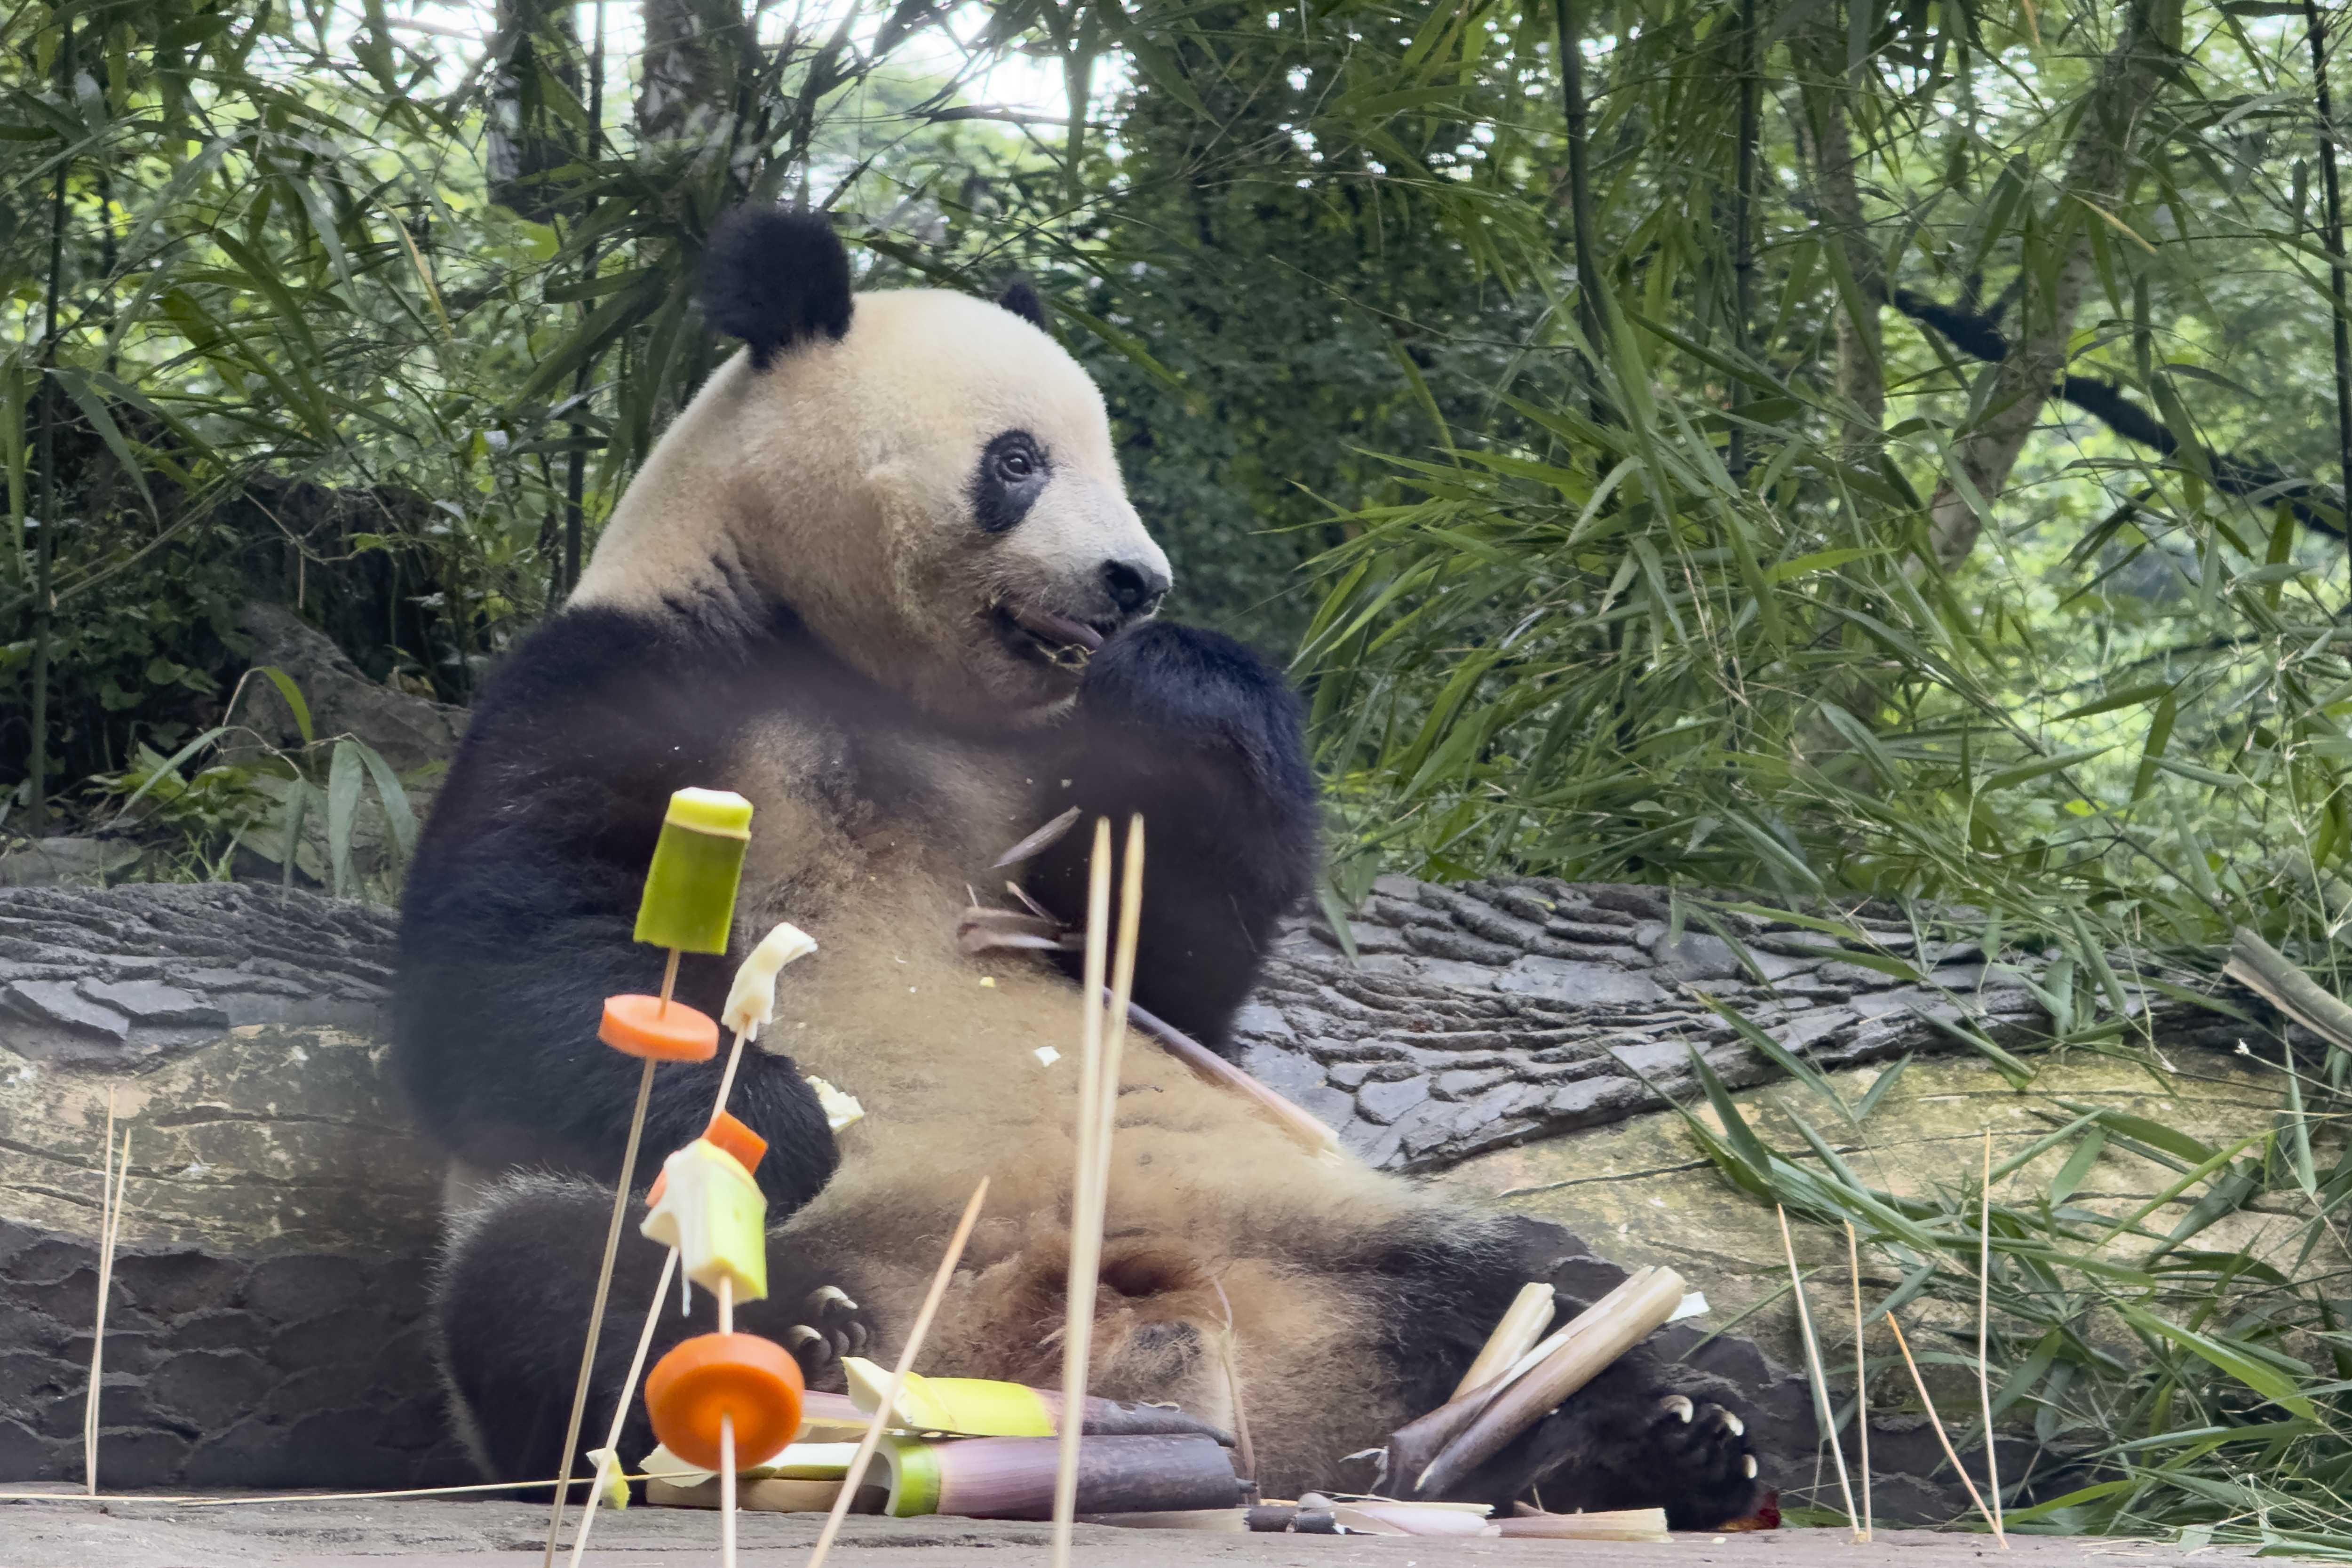 Female Giant Panda Xiang Xiang, born in Japan's Ueno Zoo in 2017 and returned to China in 2023 enjoys a birthday treat at the Bifengxia Panda Base of the China Conservation and Research Center for the Giant Panda in Ya'an, southwest China's Sichuan Province, Monday, June 12, 2024. (AP Photo/Caroline Chen)